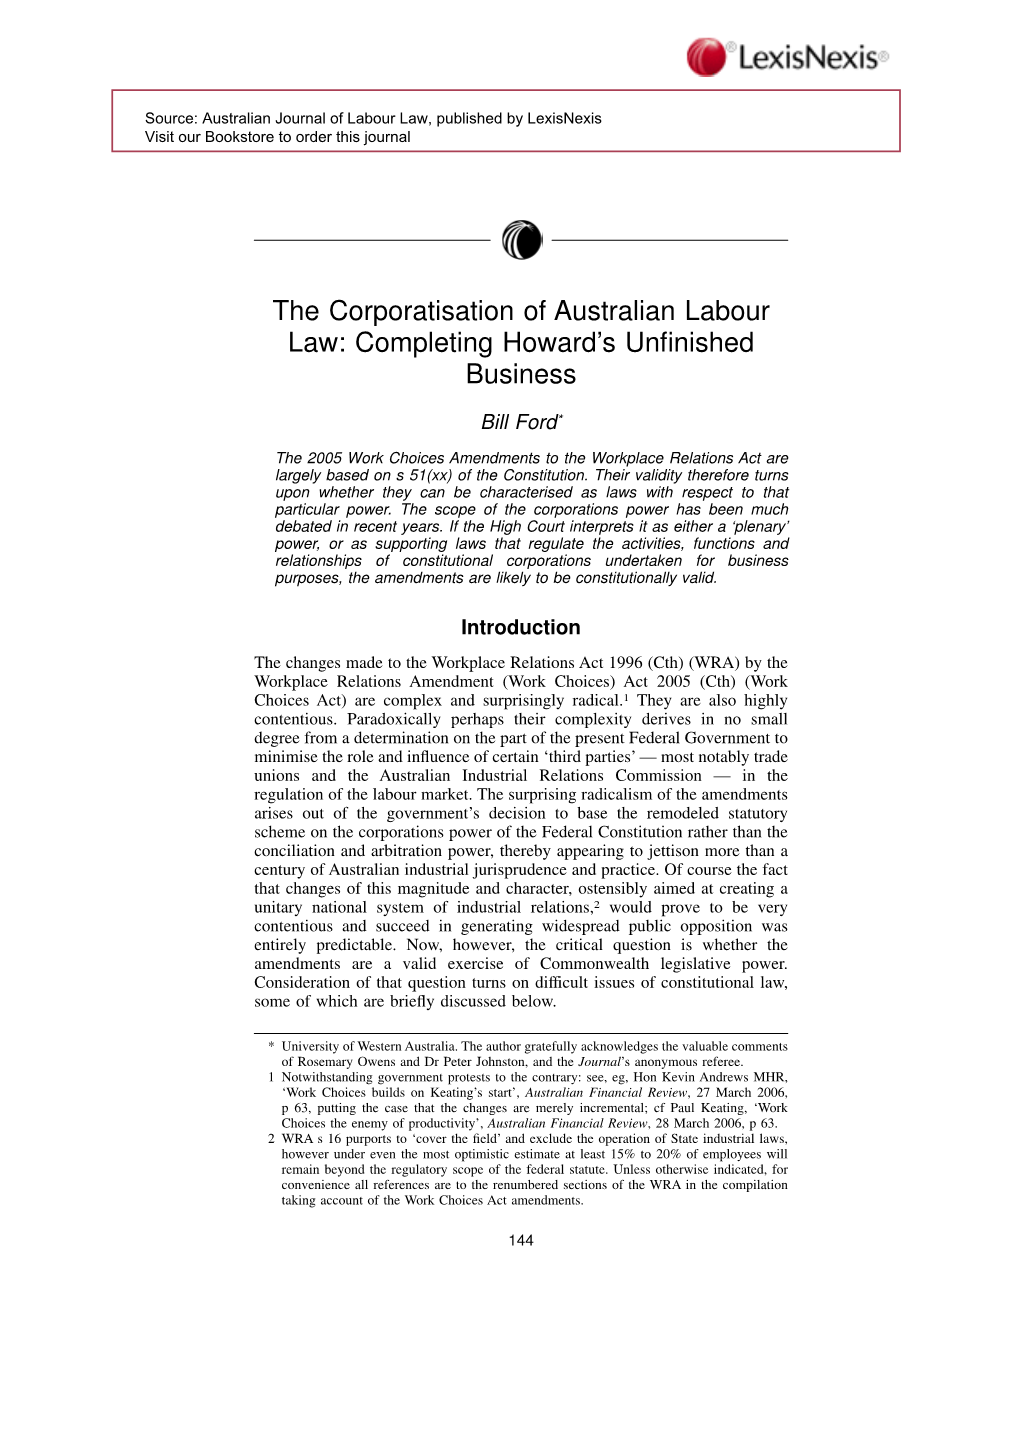 The Corporatisation of Australian Labour Law: Completing Howard's